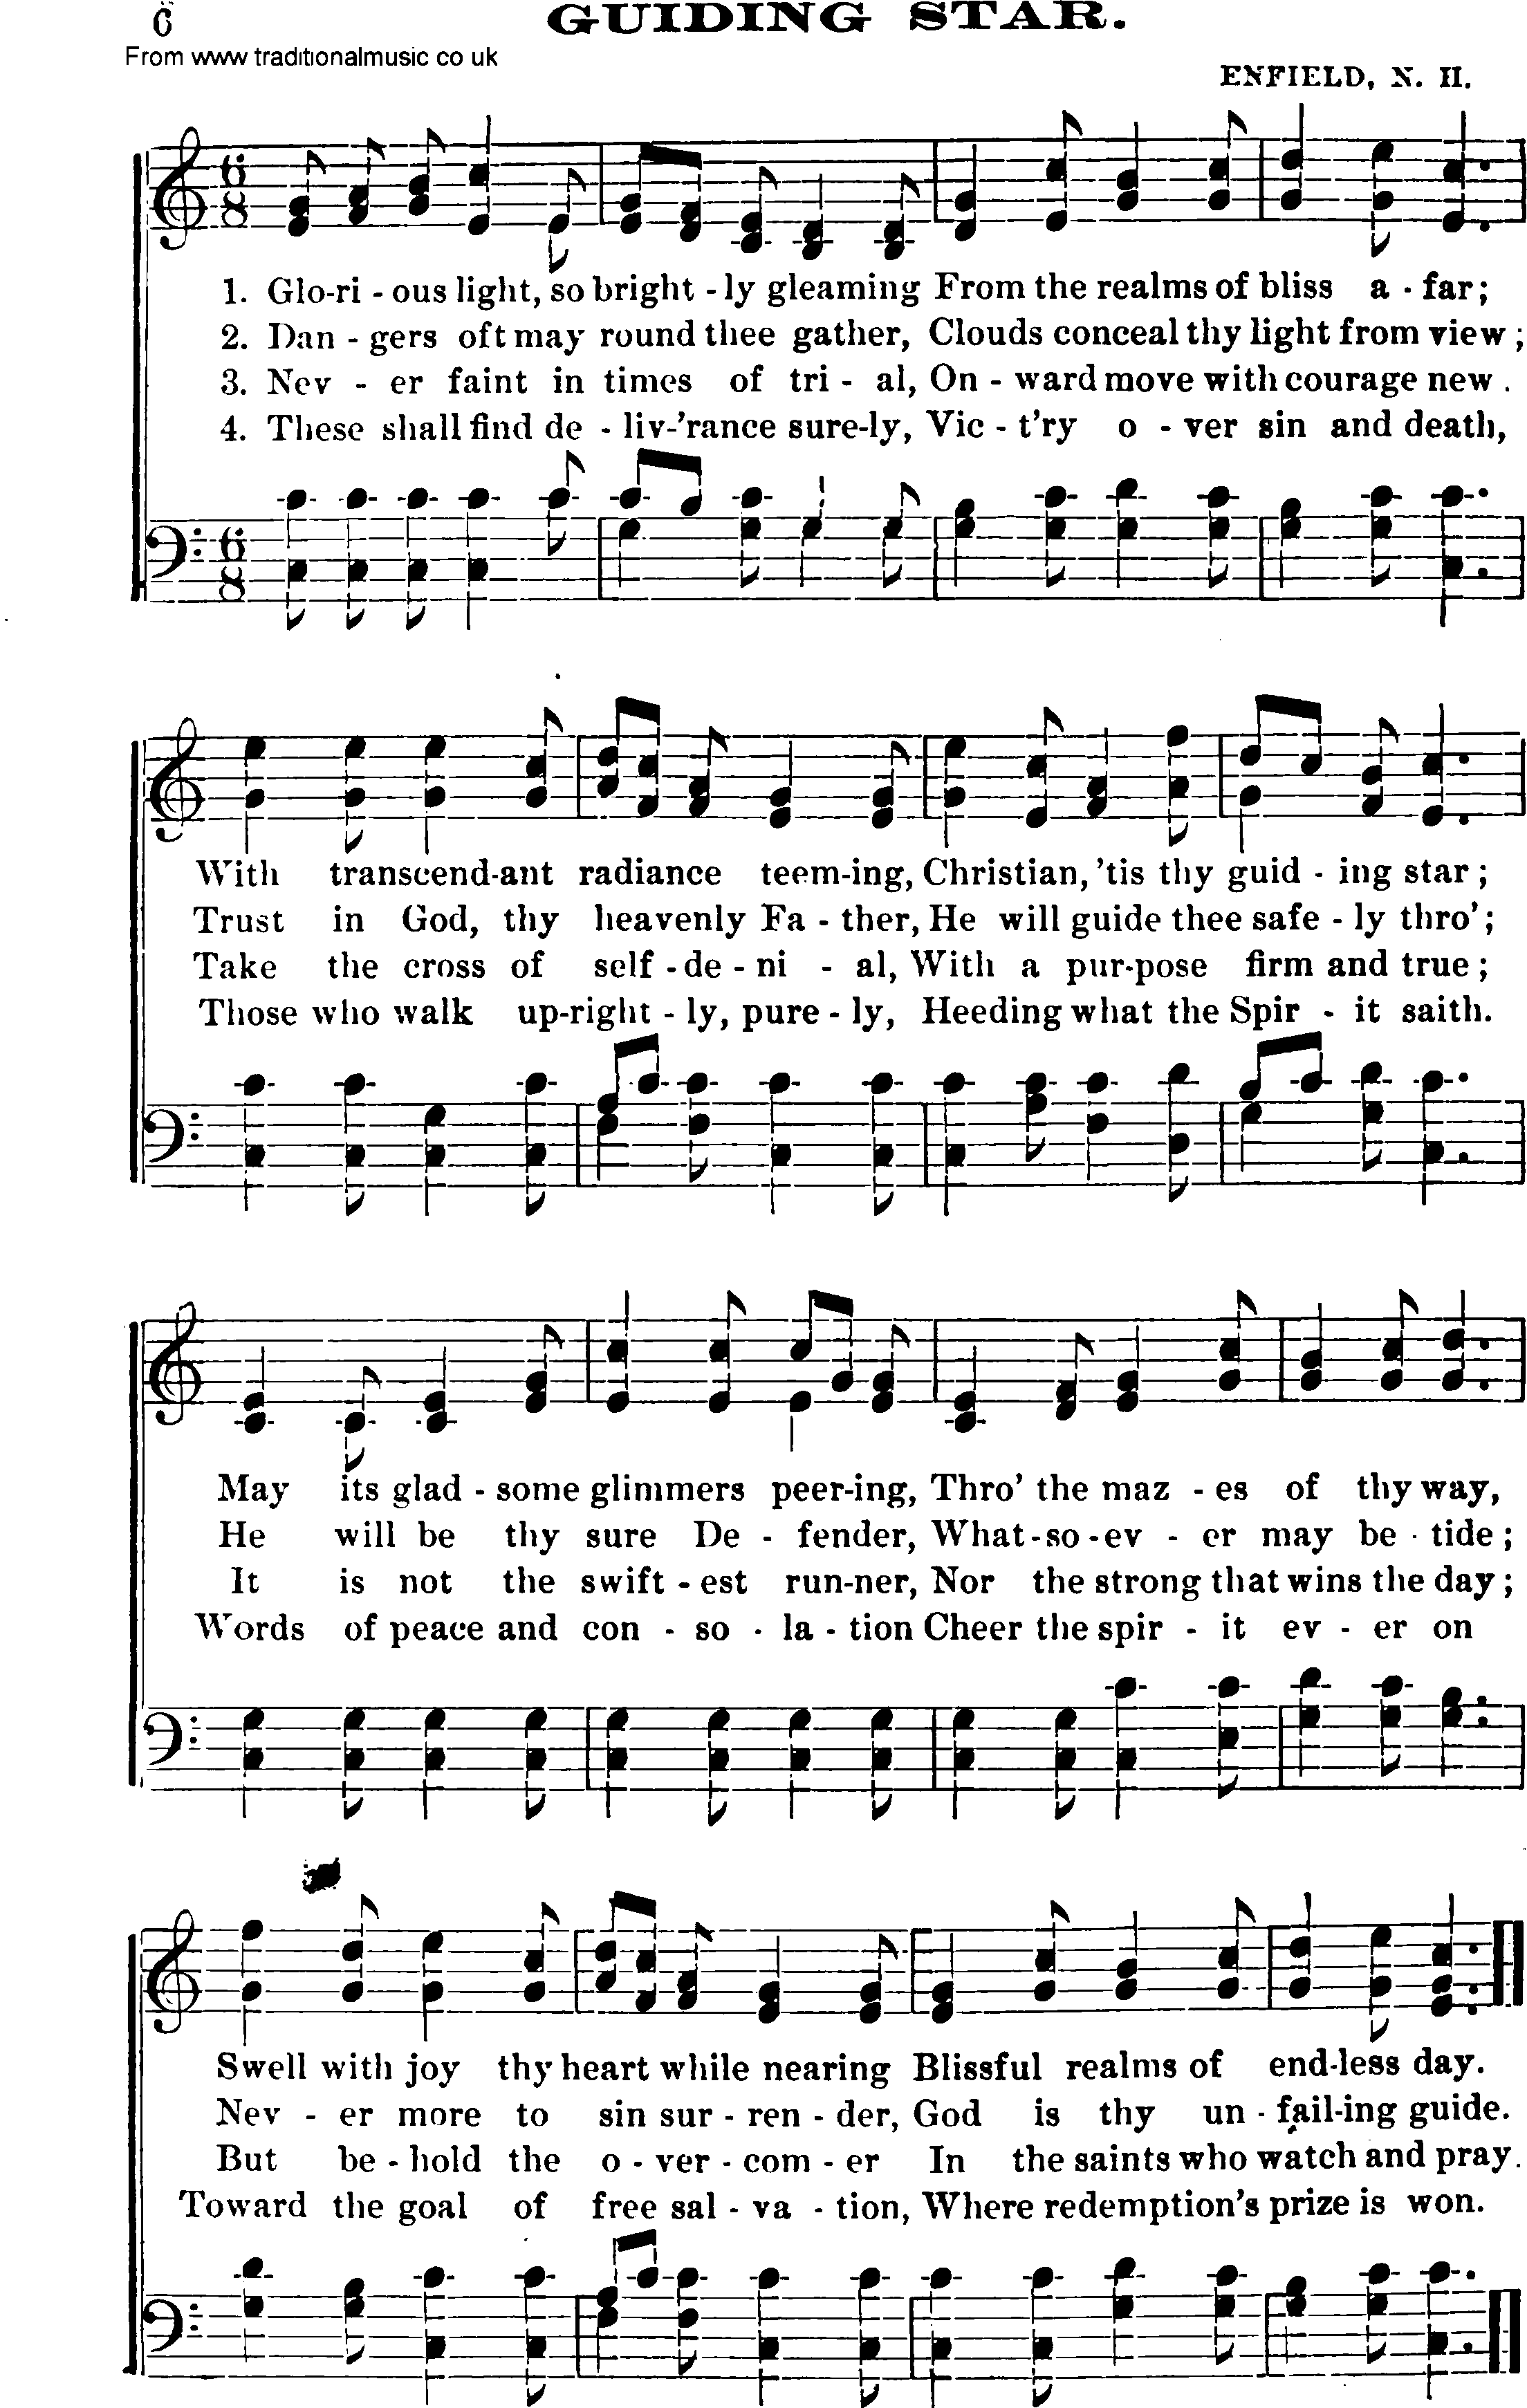 Shaker Music collection, Hymn: Guiding Star, sheetmusic and PDF